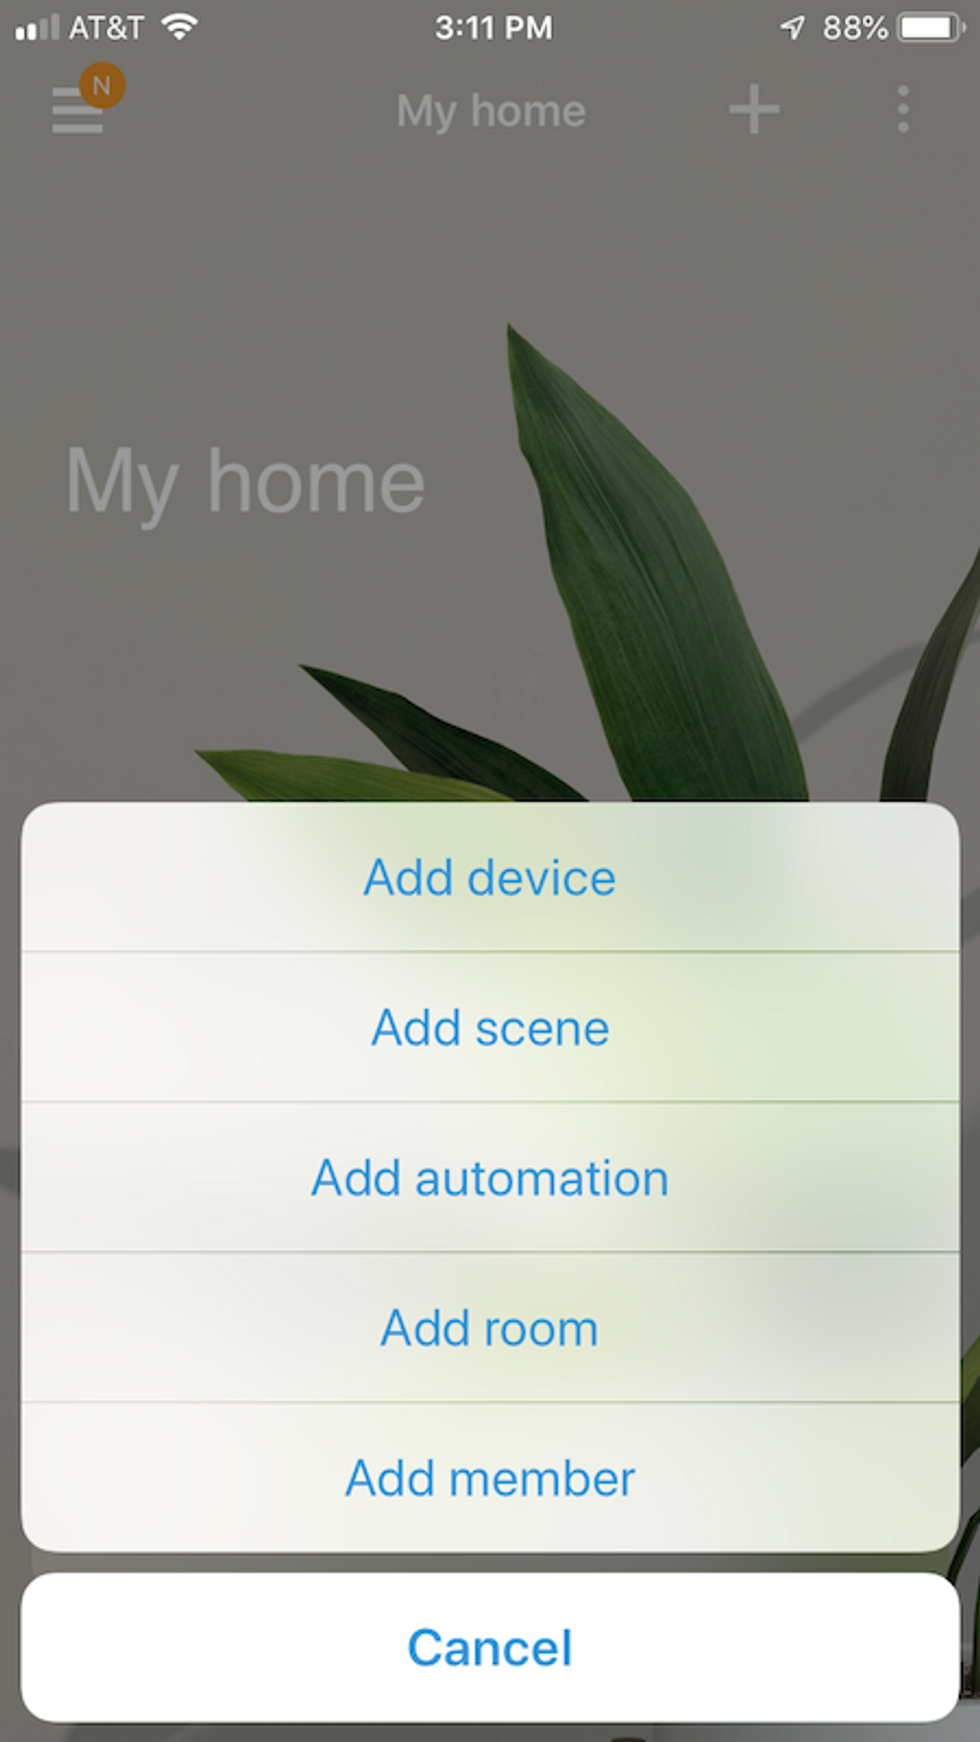 add a device screen from smartthings mobile app